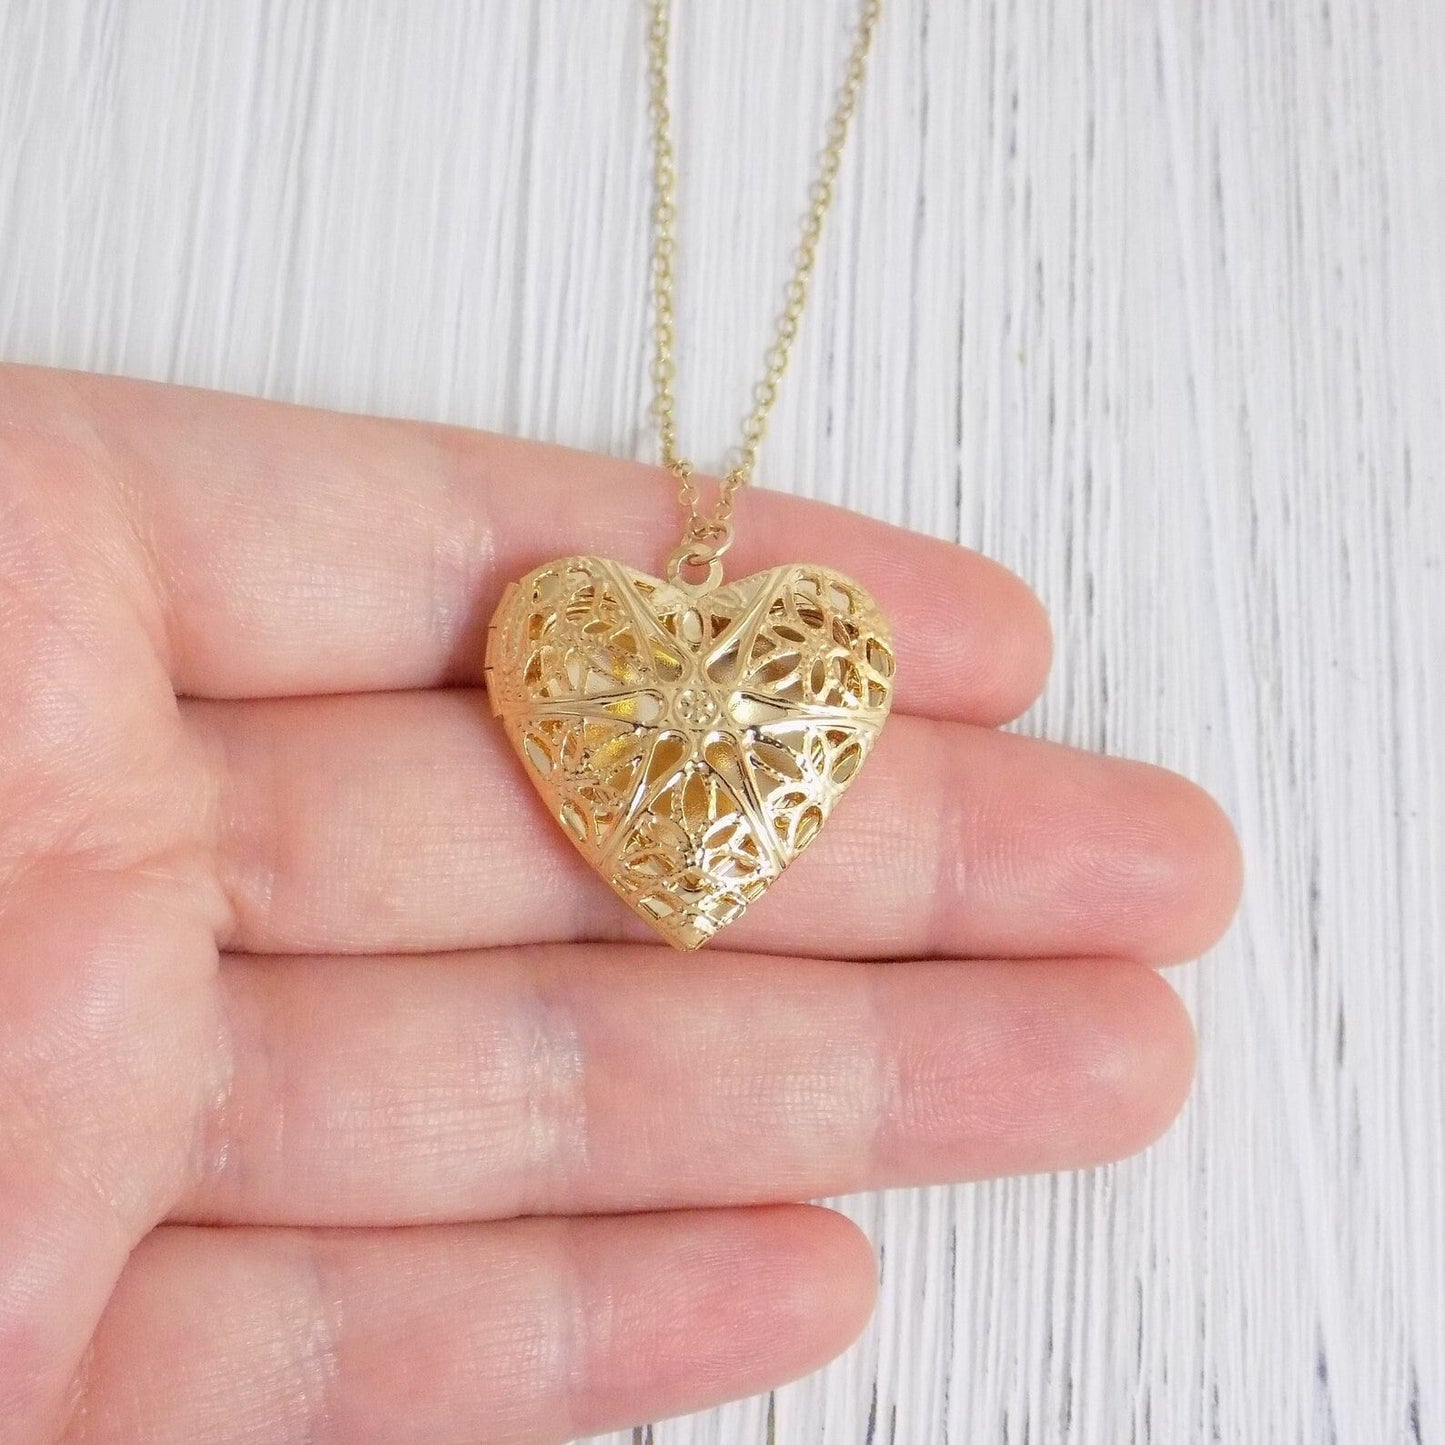 Gold Filigree Heart Locket Necklace for Pictures on 14K Gold Filled Chain, Christmas Gift For Her, L1-24